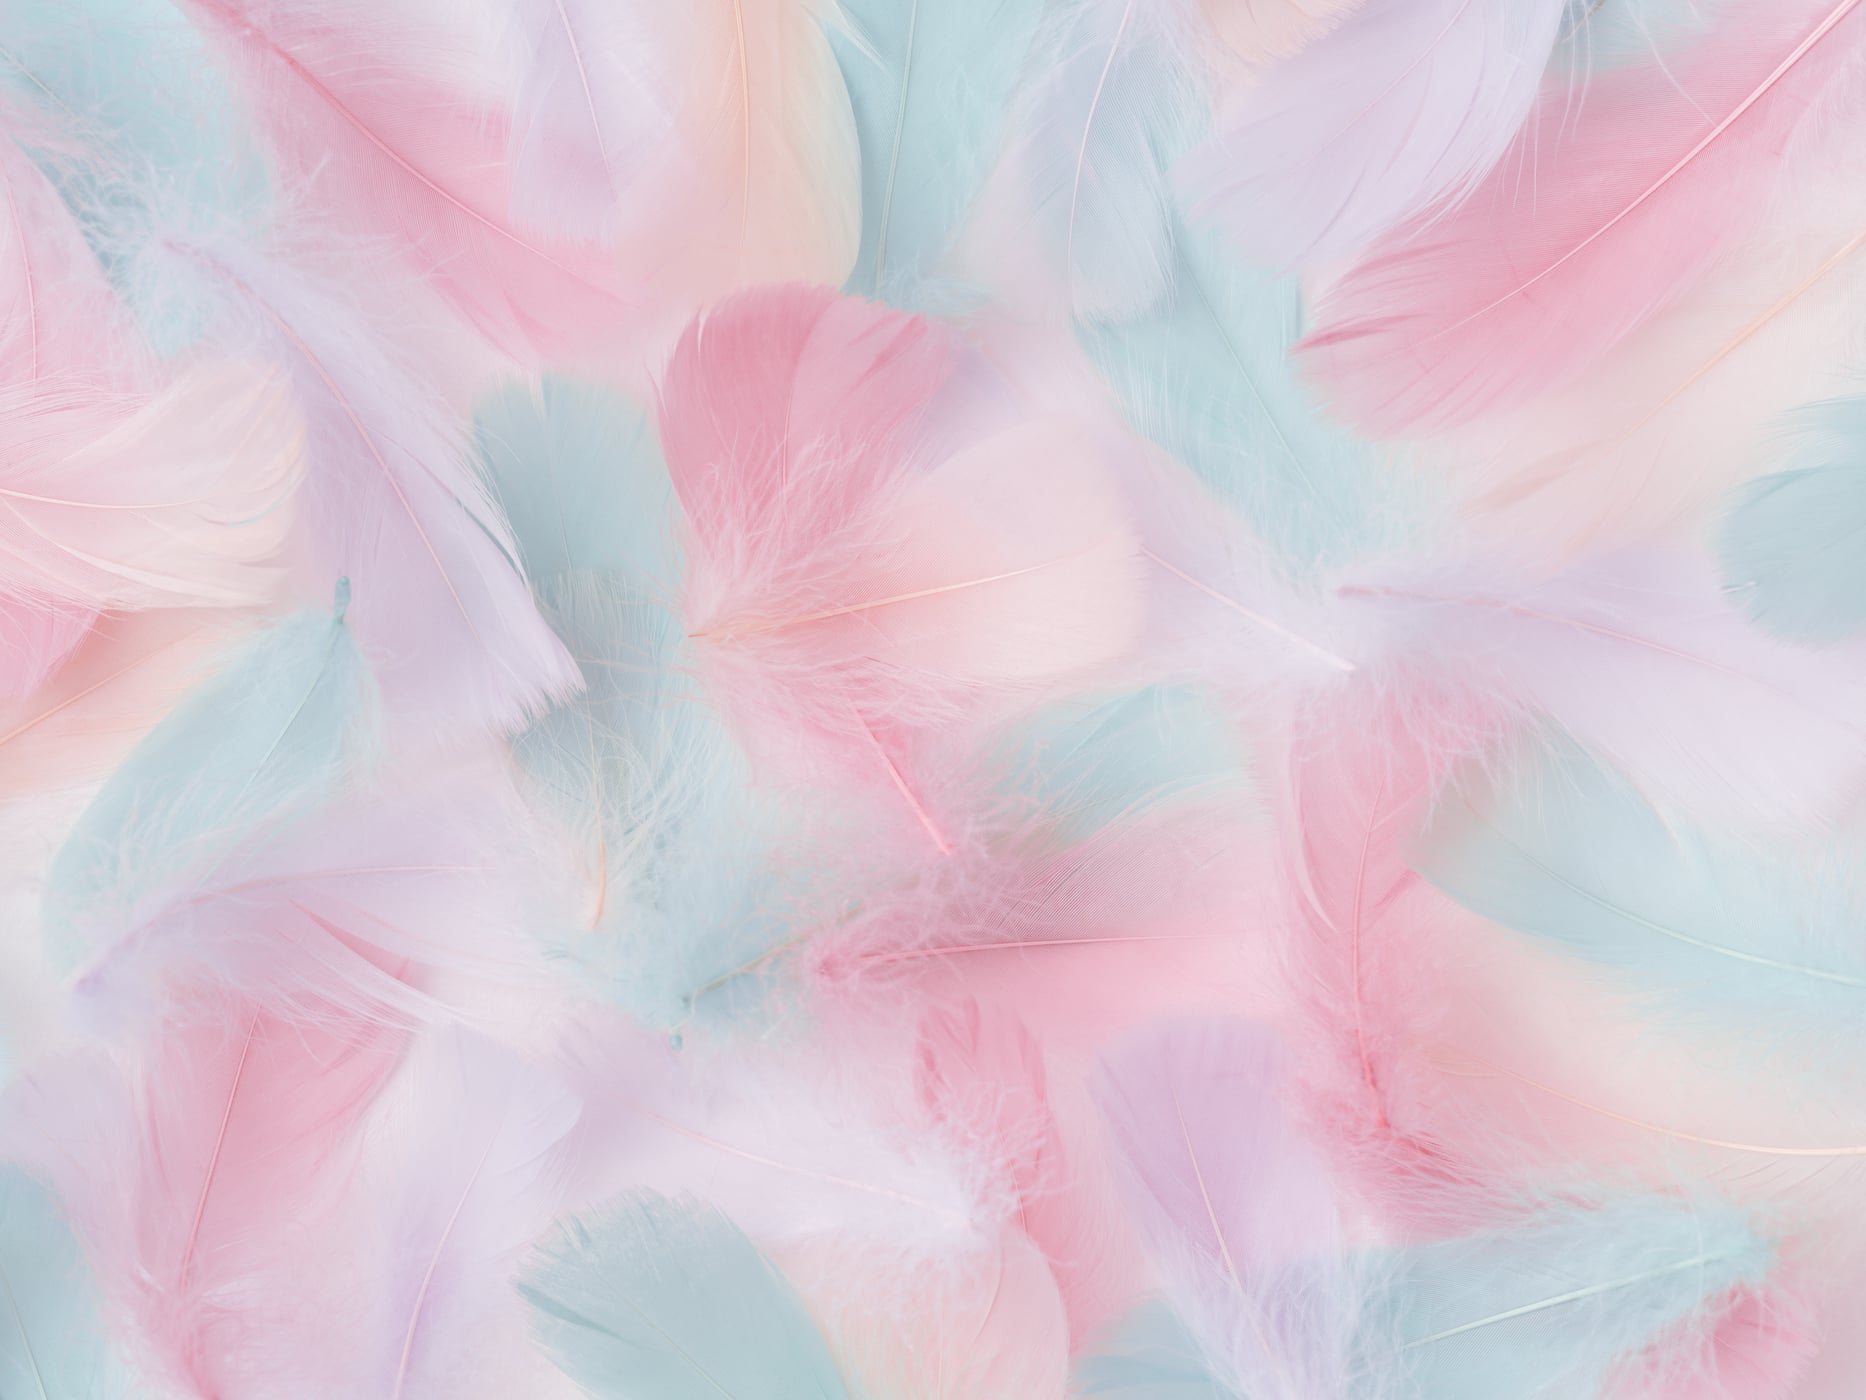 407 megapixels! A very high resolution, large-format VAST photo print of colorful feathers in pastel colors; still life photograph created by Assaf Frank.